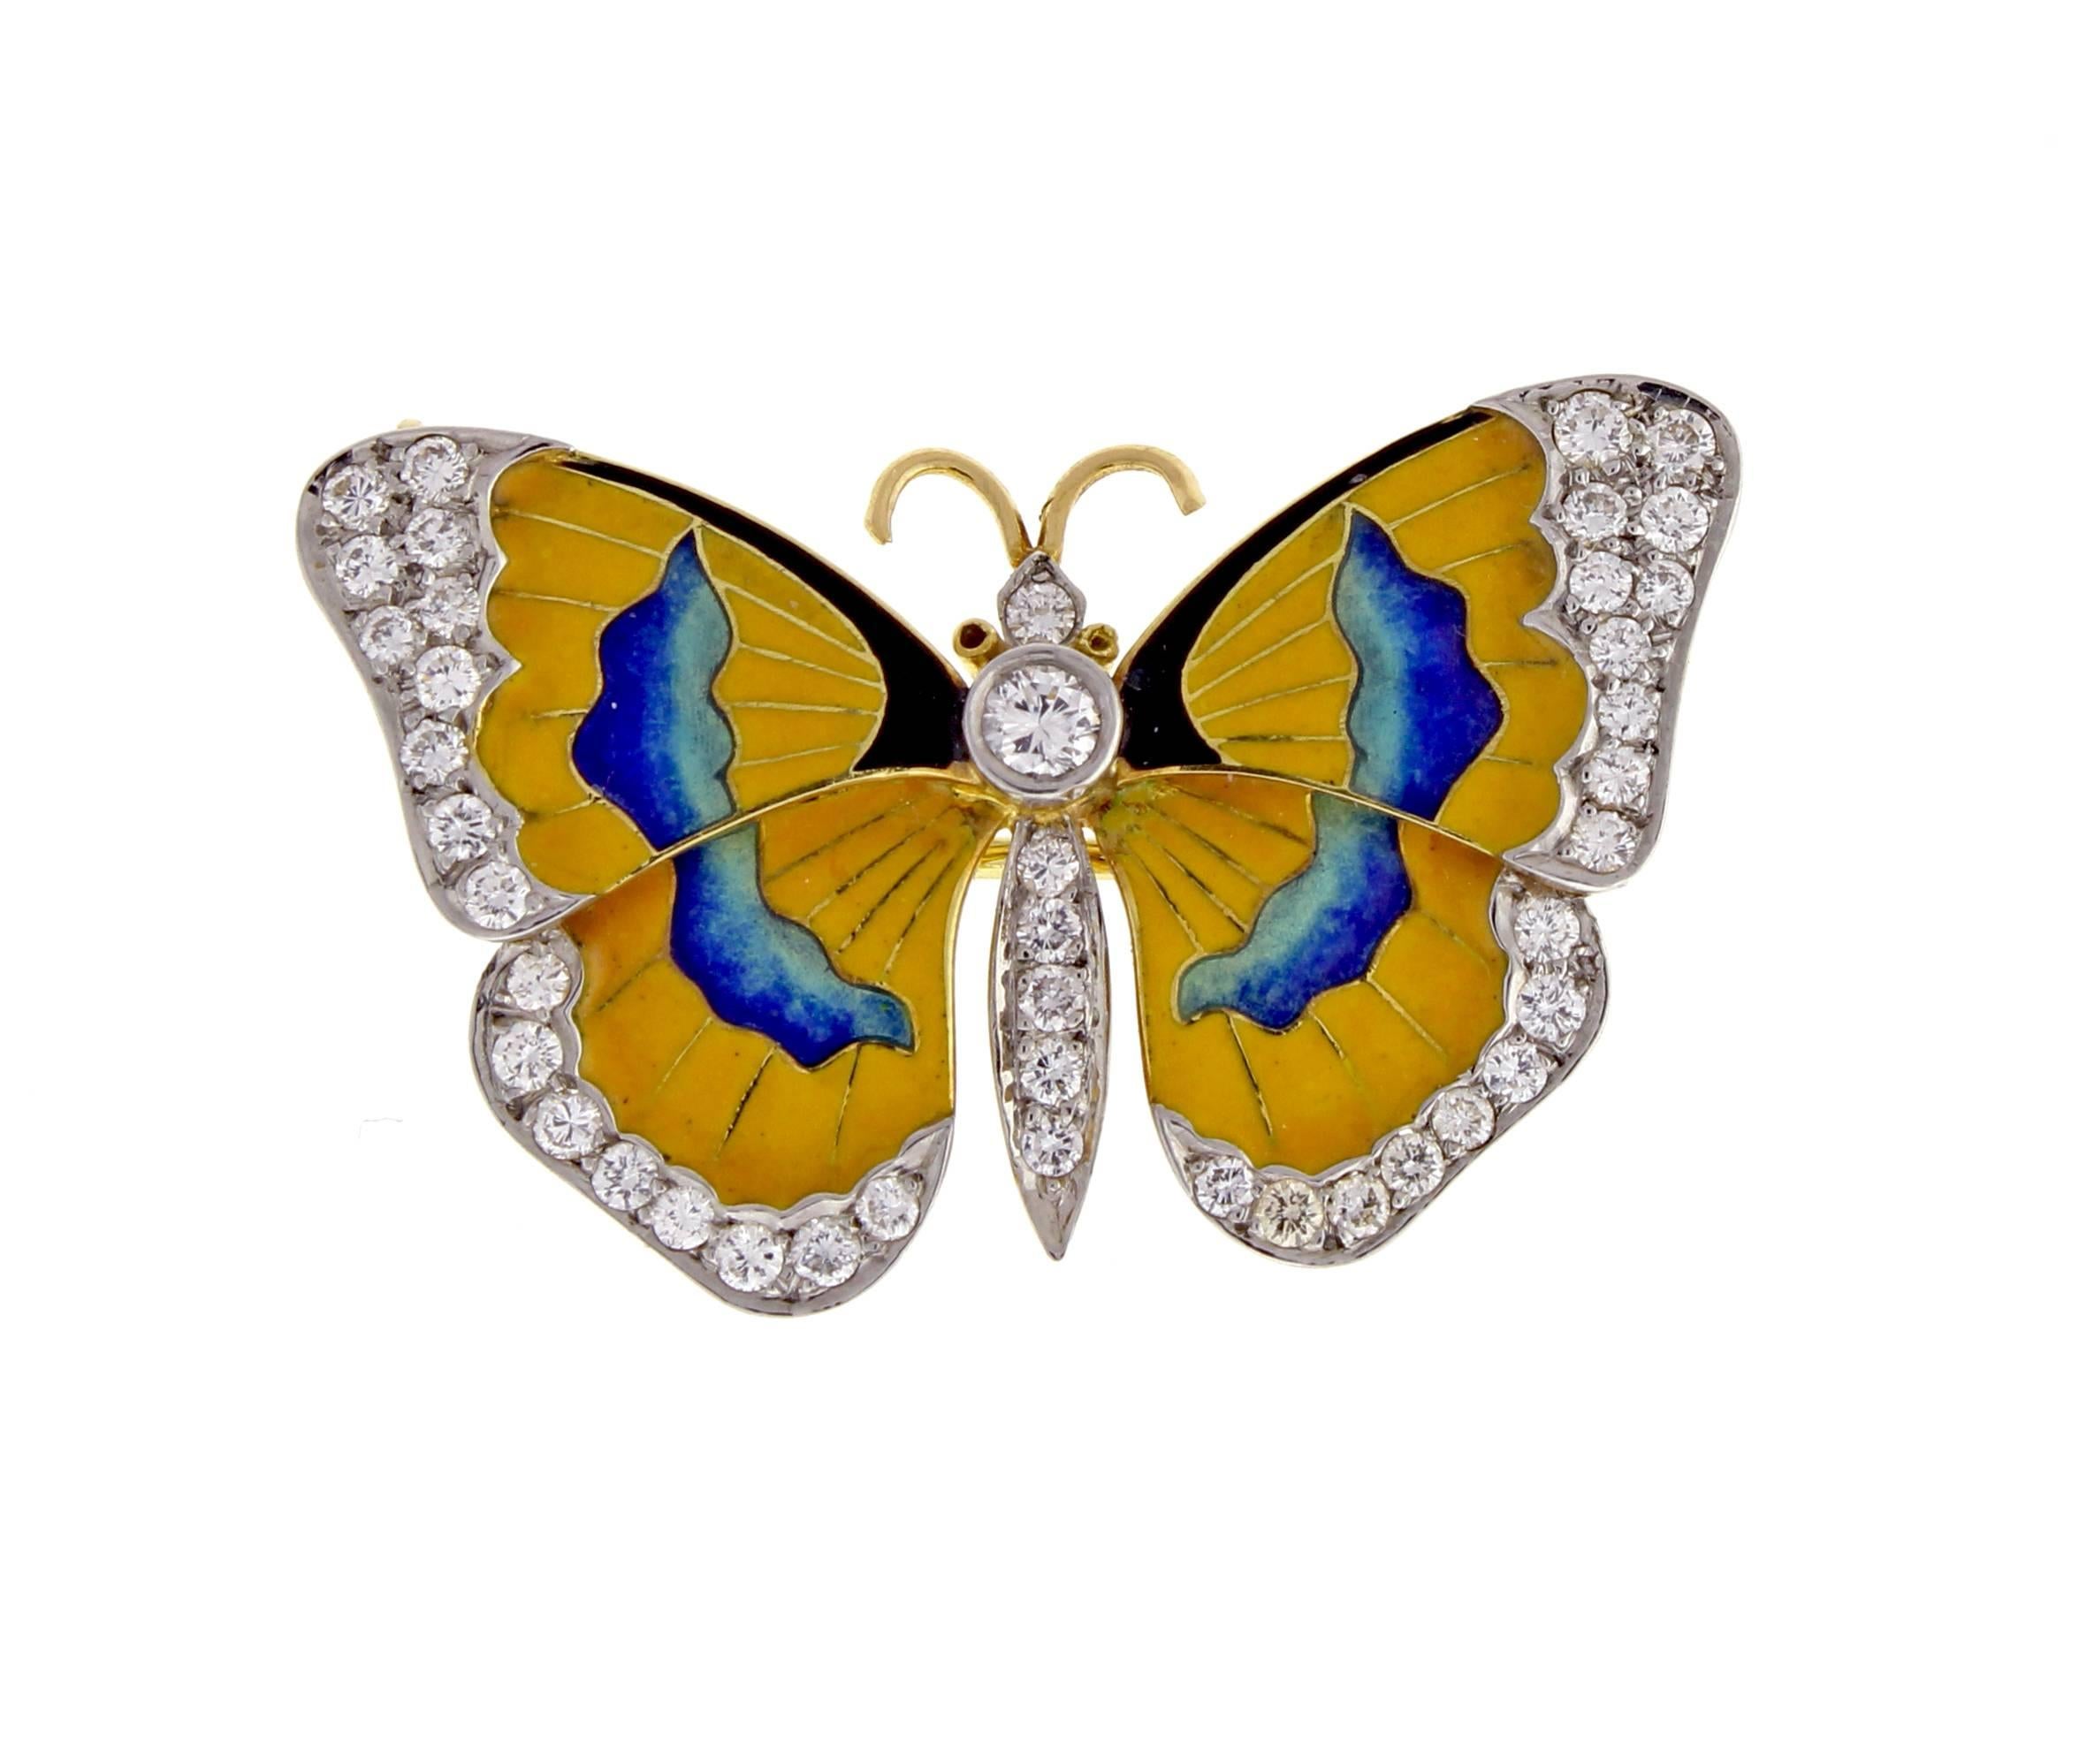 From Van Cleef & Arpels, a stunning enamel and diamond butterfly brooch. The 18 karat yellow gold brooch easily converts to a necklace. The brooch is set with 43 brilliant diamonds weighing approximately .70 carats and finished with vibrant hand